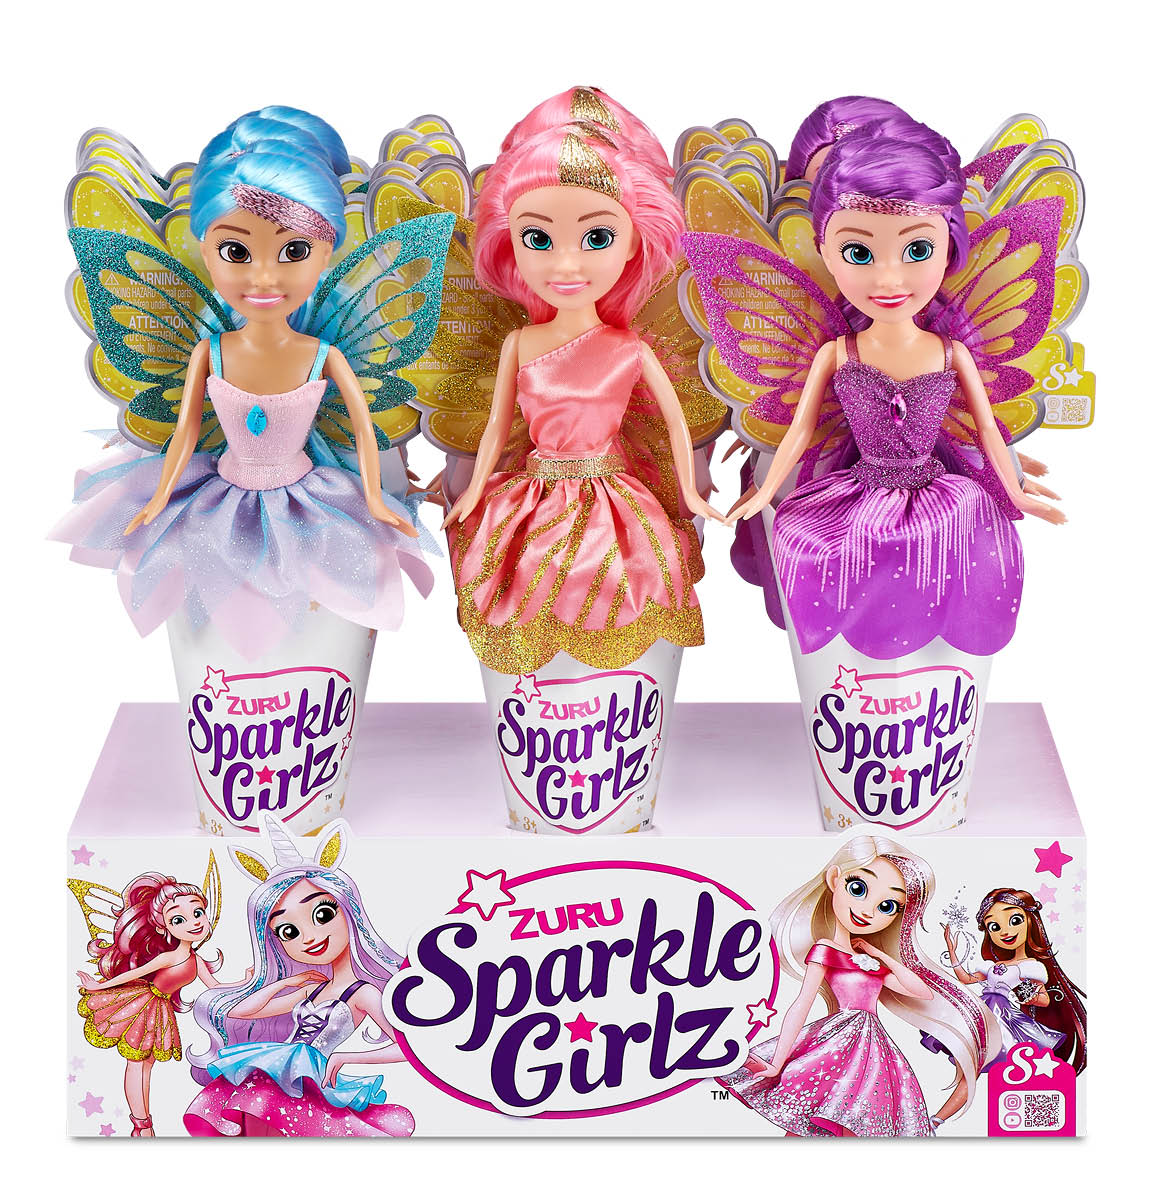 Sparkle Girlz Fairy Doll in Orange Outfit